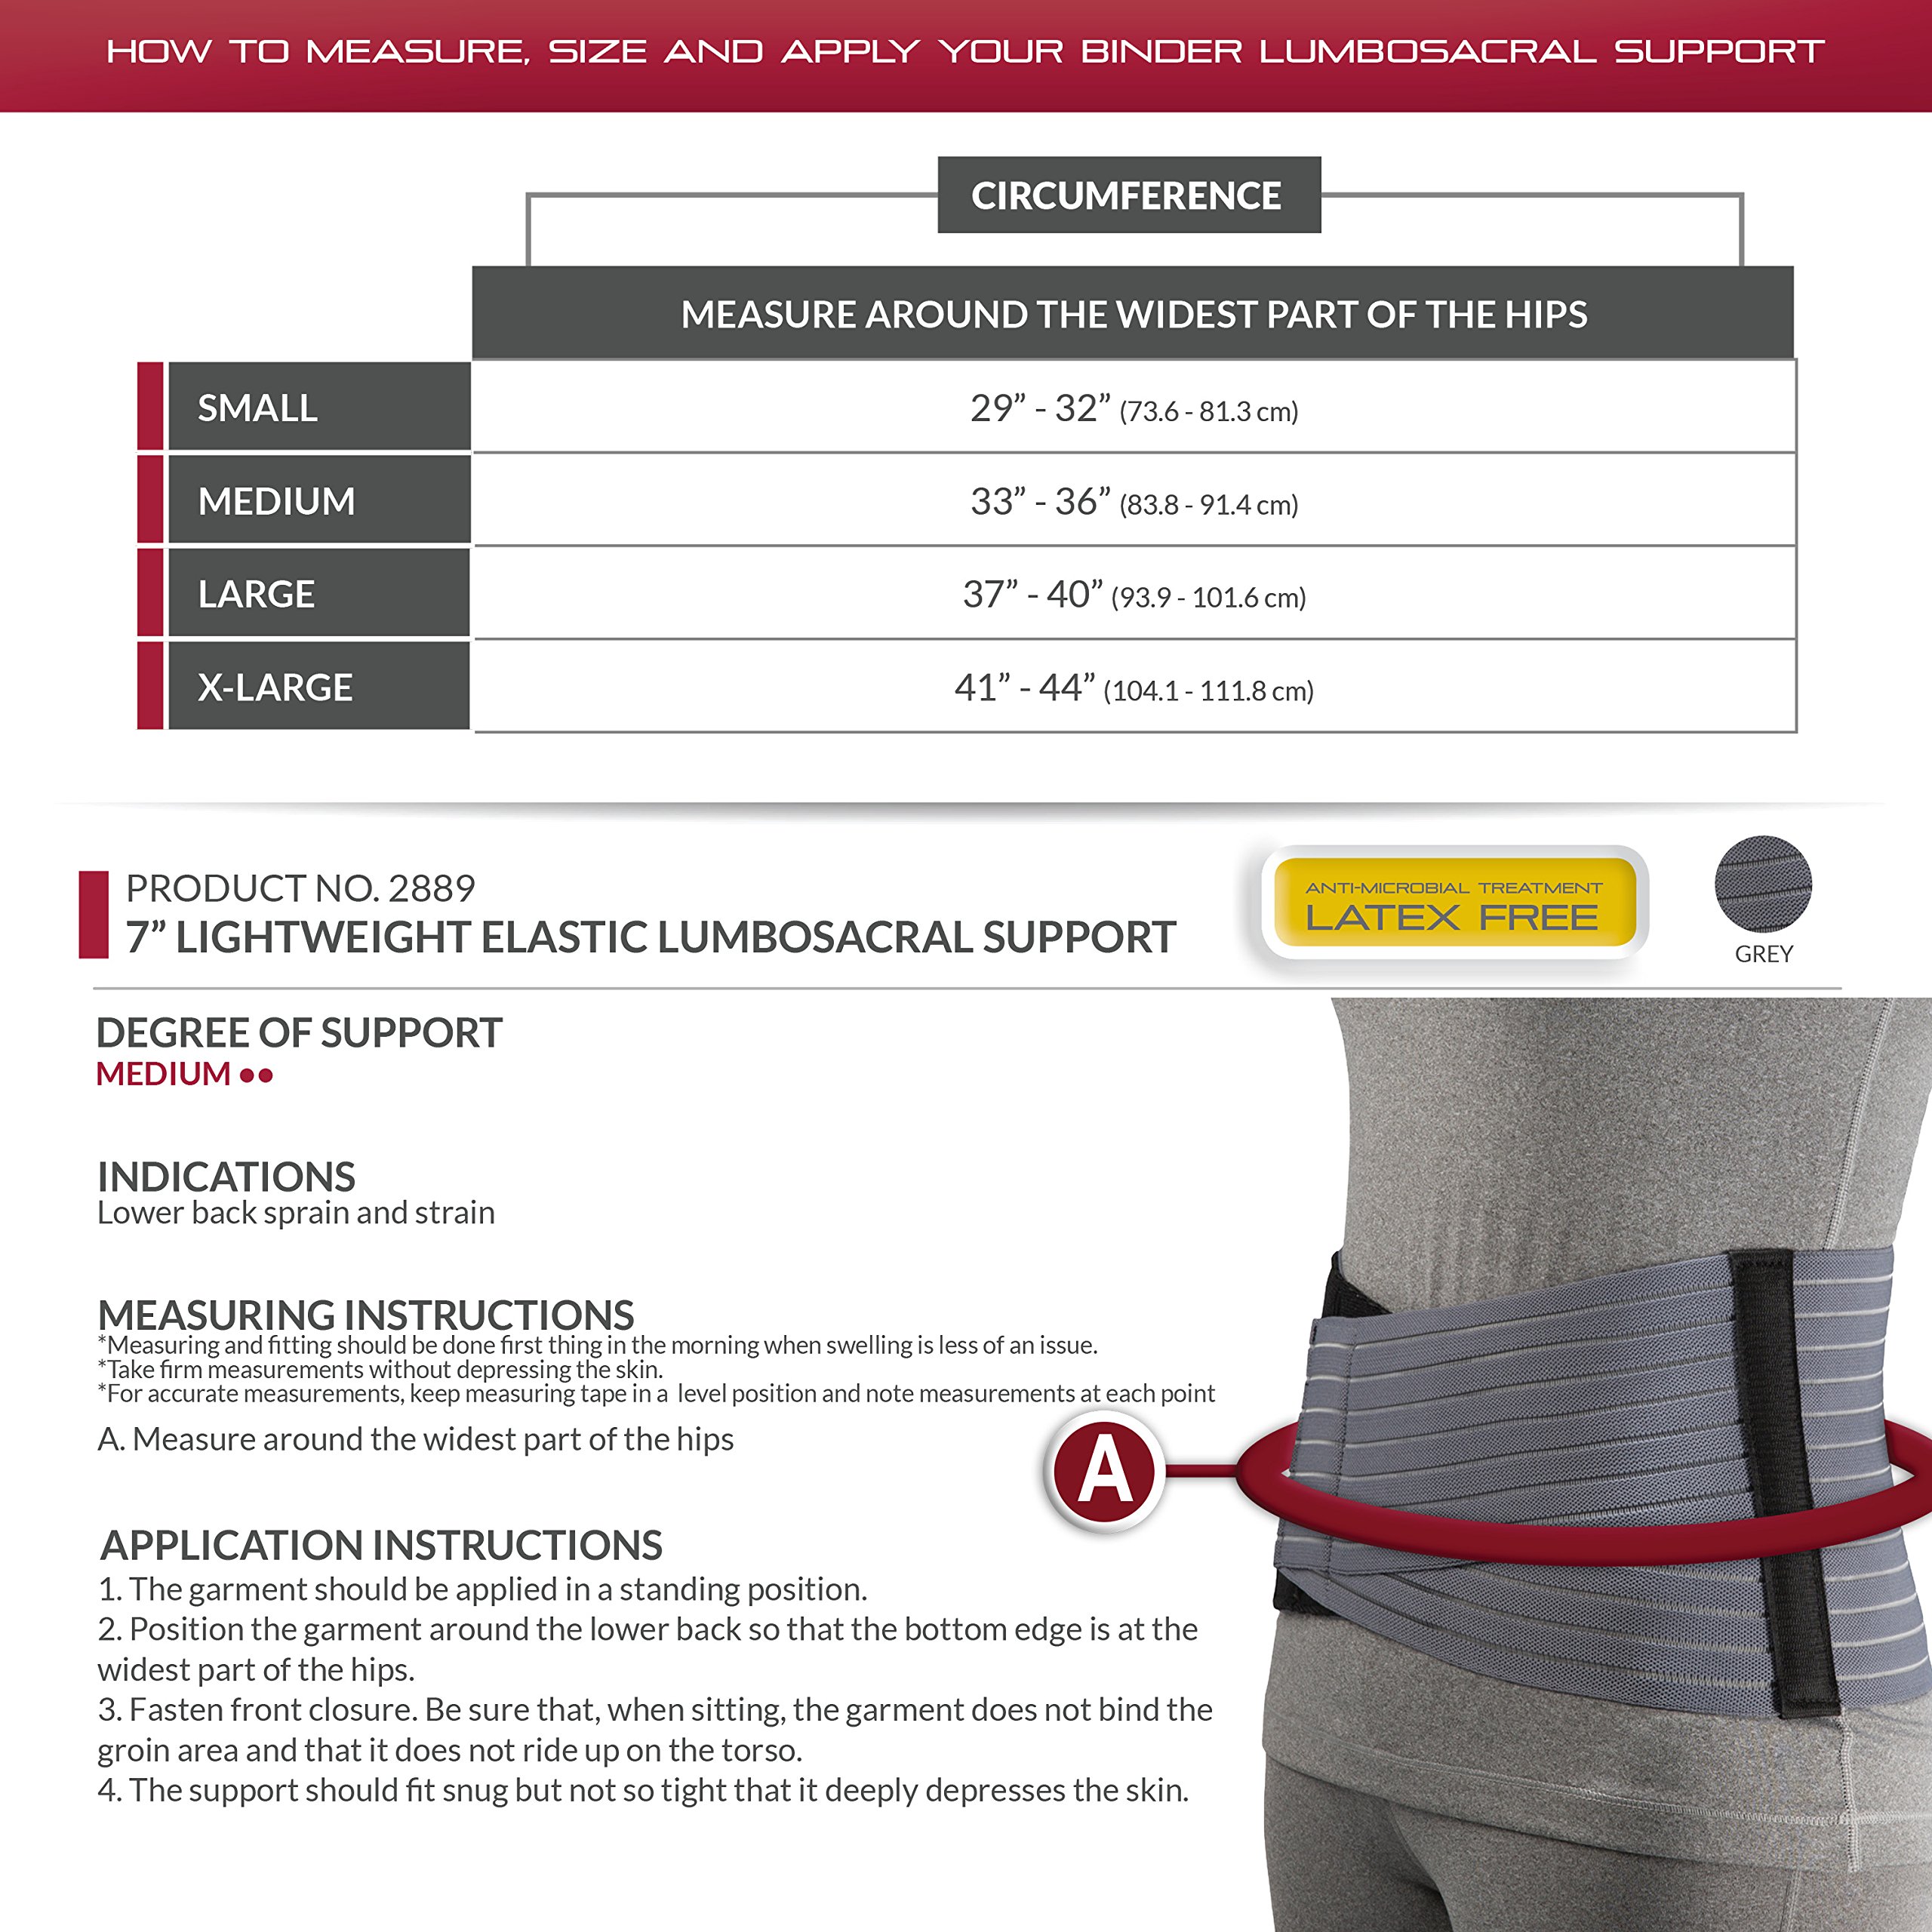 OTC Lower Back Select Series Lumbosacral Support for Women, Grey, X-Large